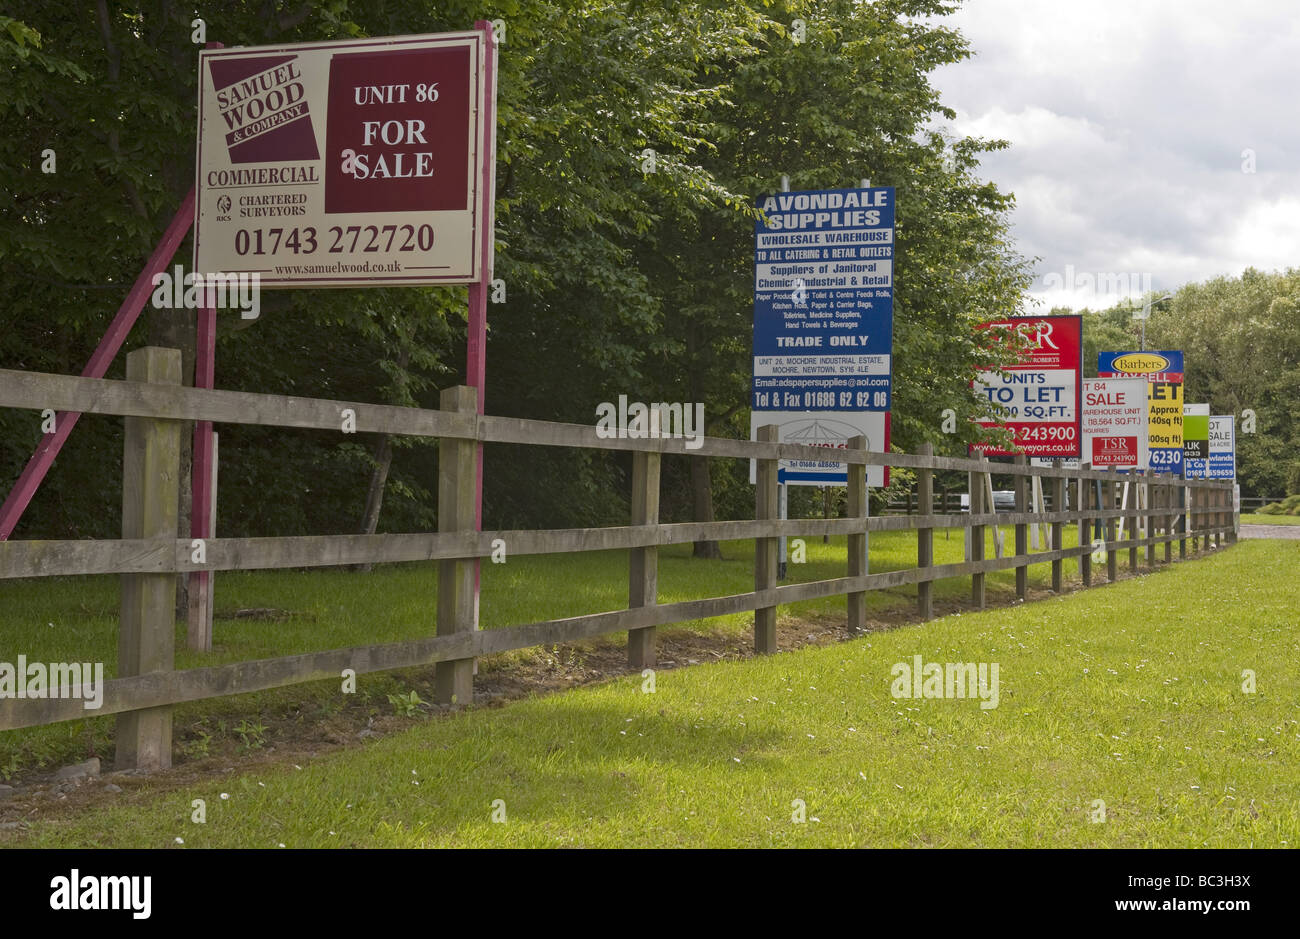 Multiple 'For Sale' and 'To Let' signs lining the roadside at an industrial estate site during economic recession times Stock Photo